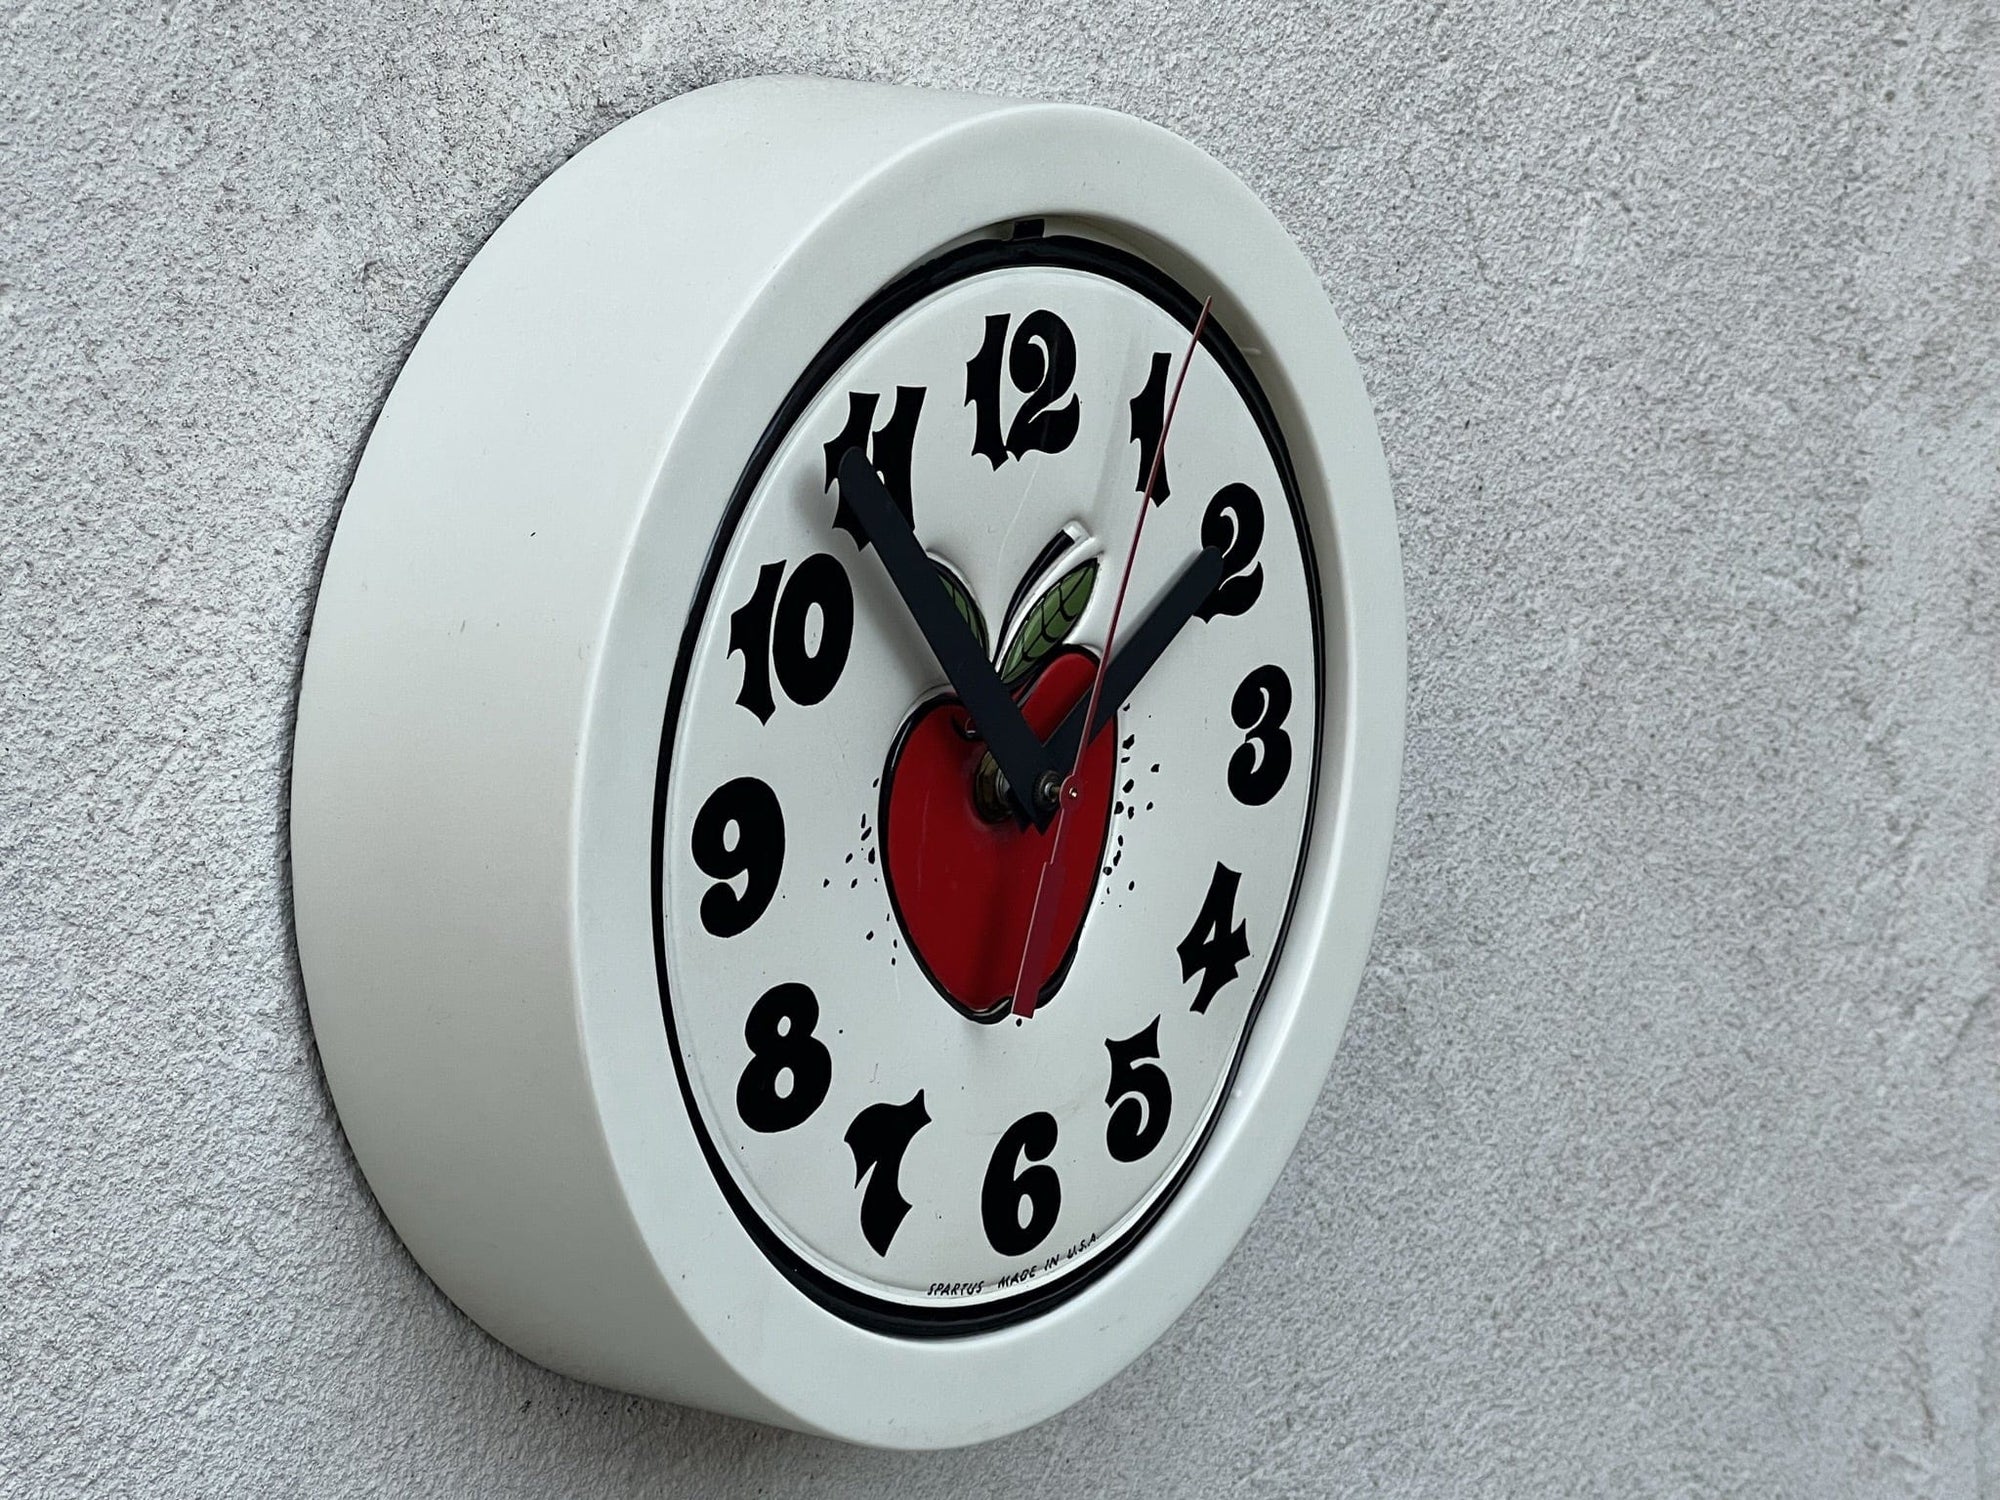 I Like Mikes Mid Century Modern Wall Clocks Vintage Round White Red Apple Kitchen Wall Clock by Spartus with Updated Quartz Movement